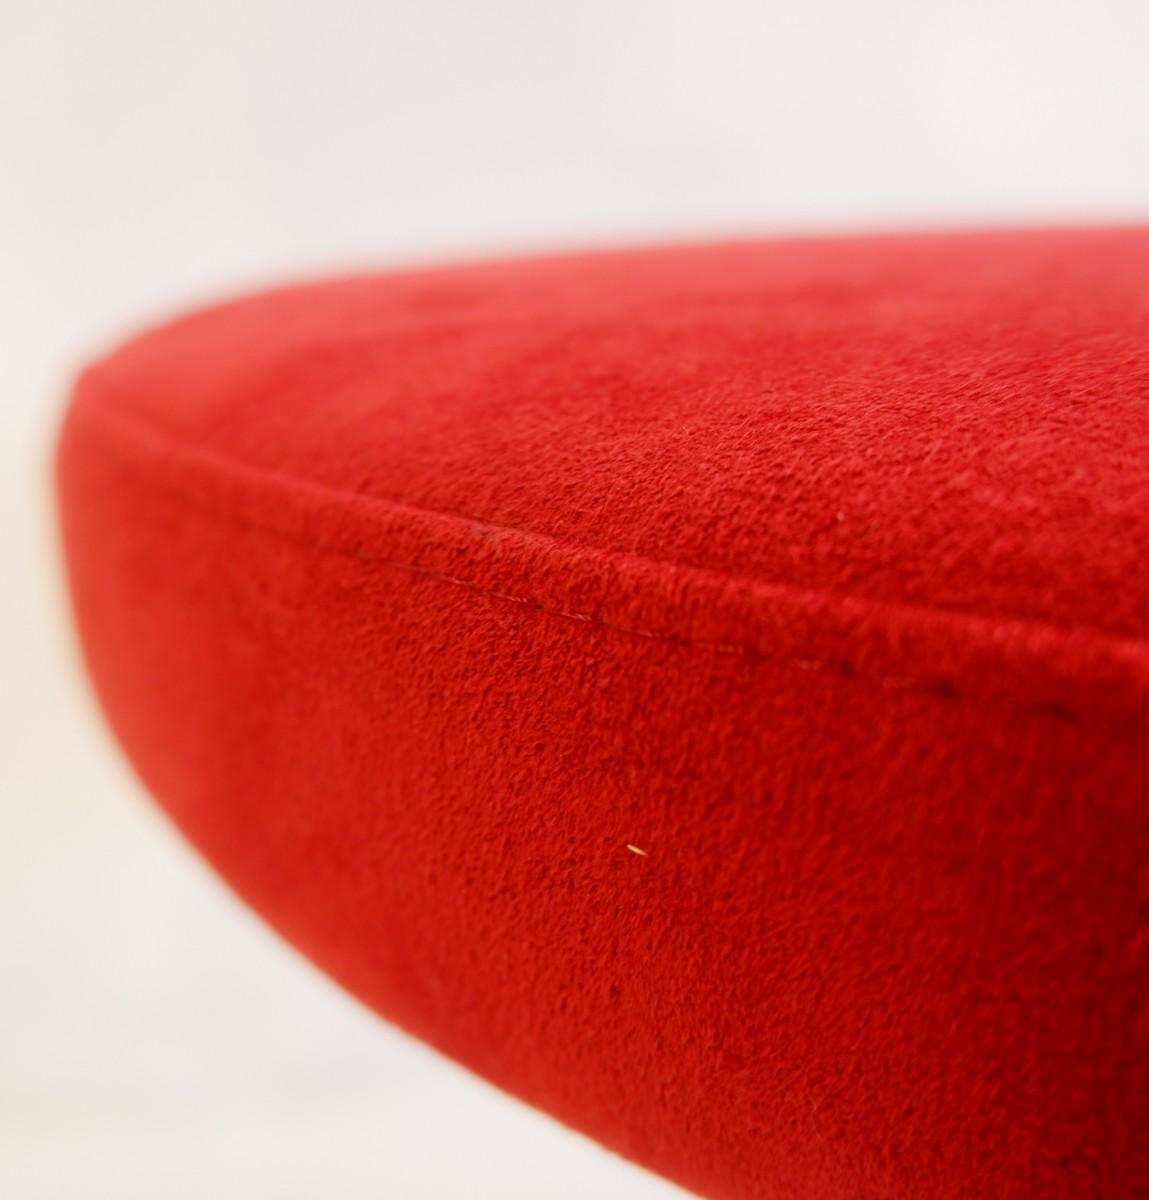 Late 20th Century 'Tulip ' Swivel Stools by Knoll, Red Suede Seat, 2 Available